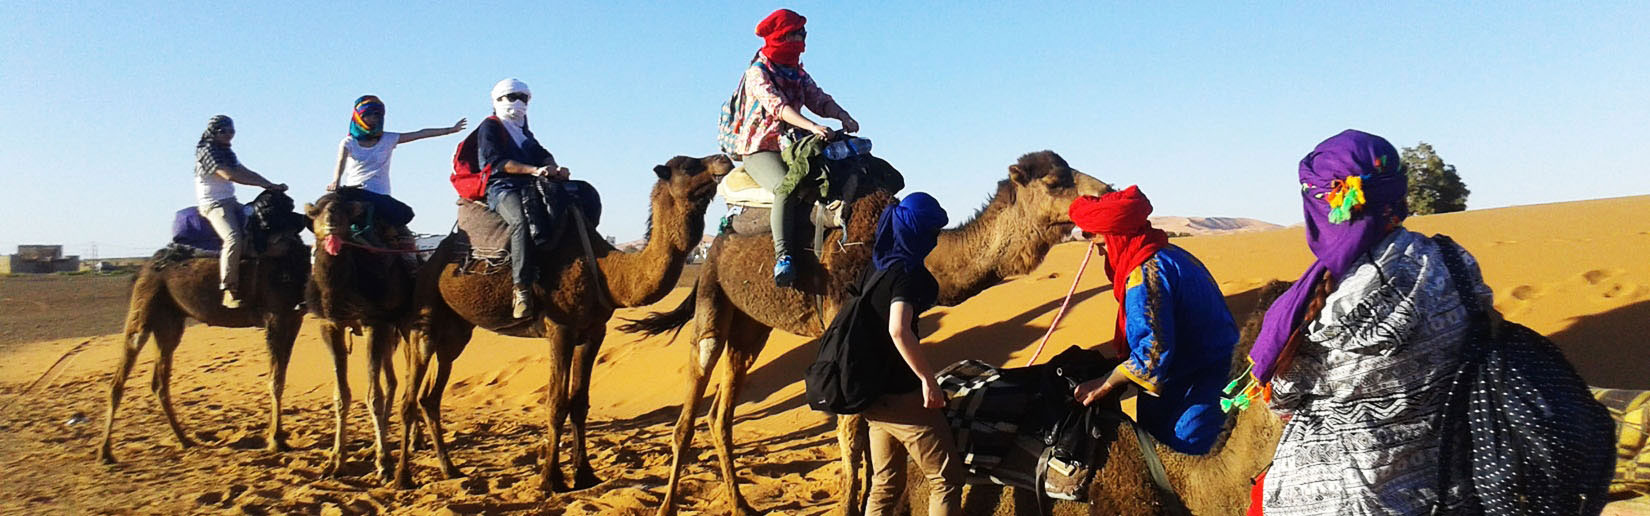 Morocco Desert Tours from Marrakech or from Fes 